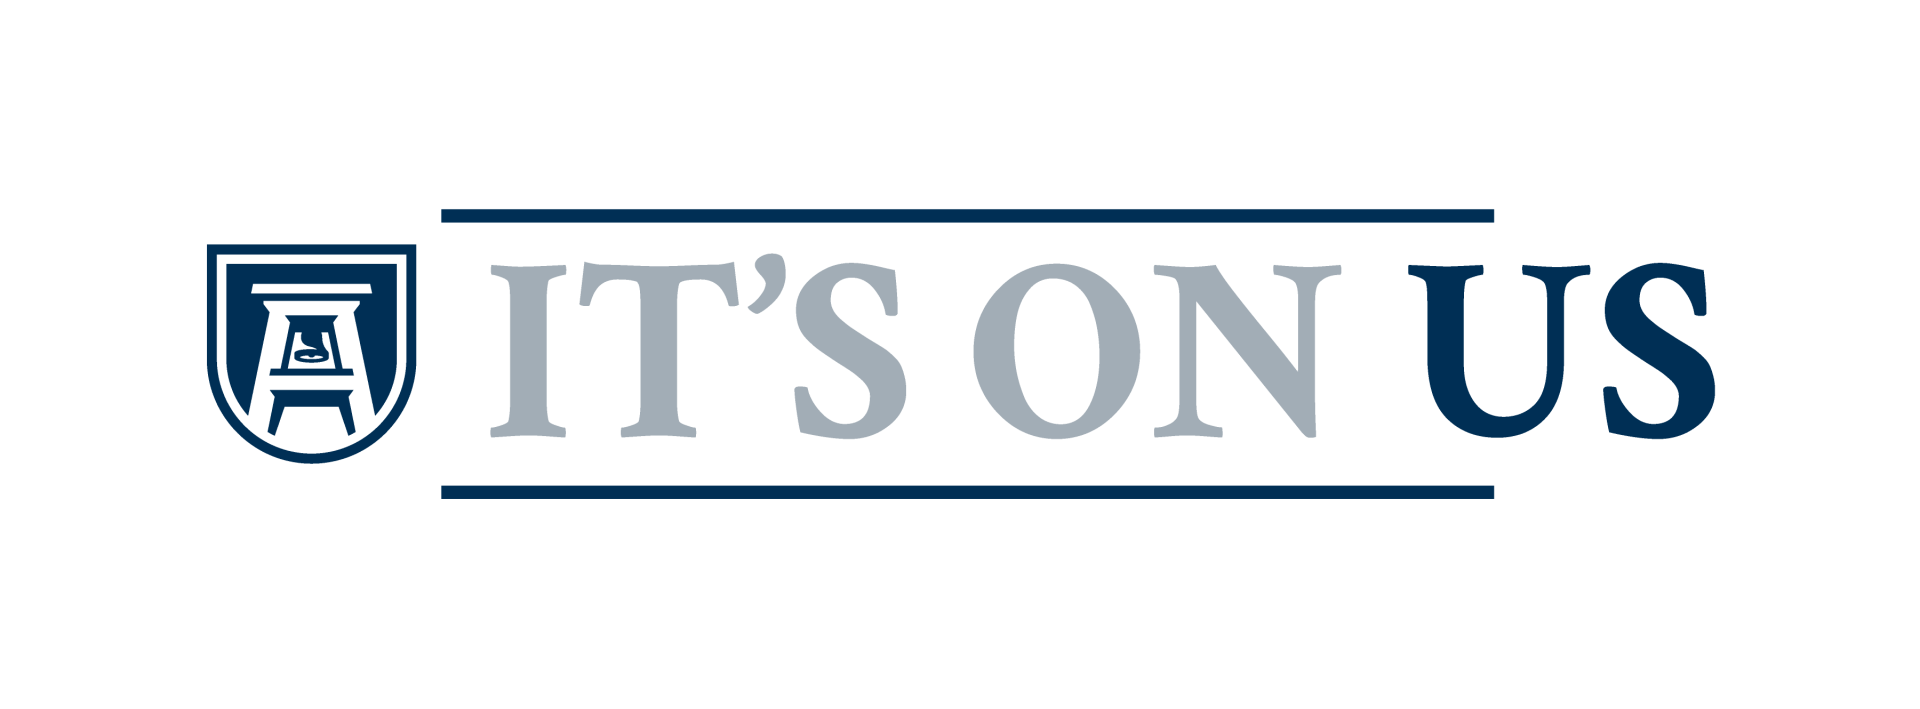 logo that reads "IT'S ON US"